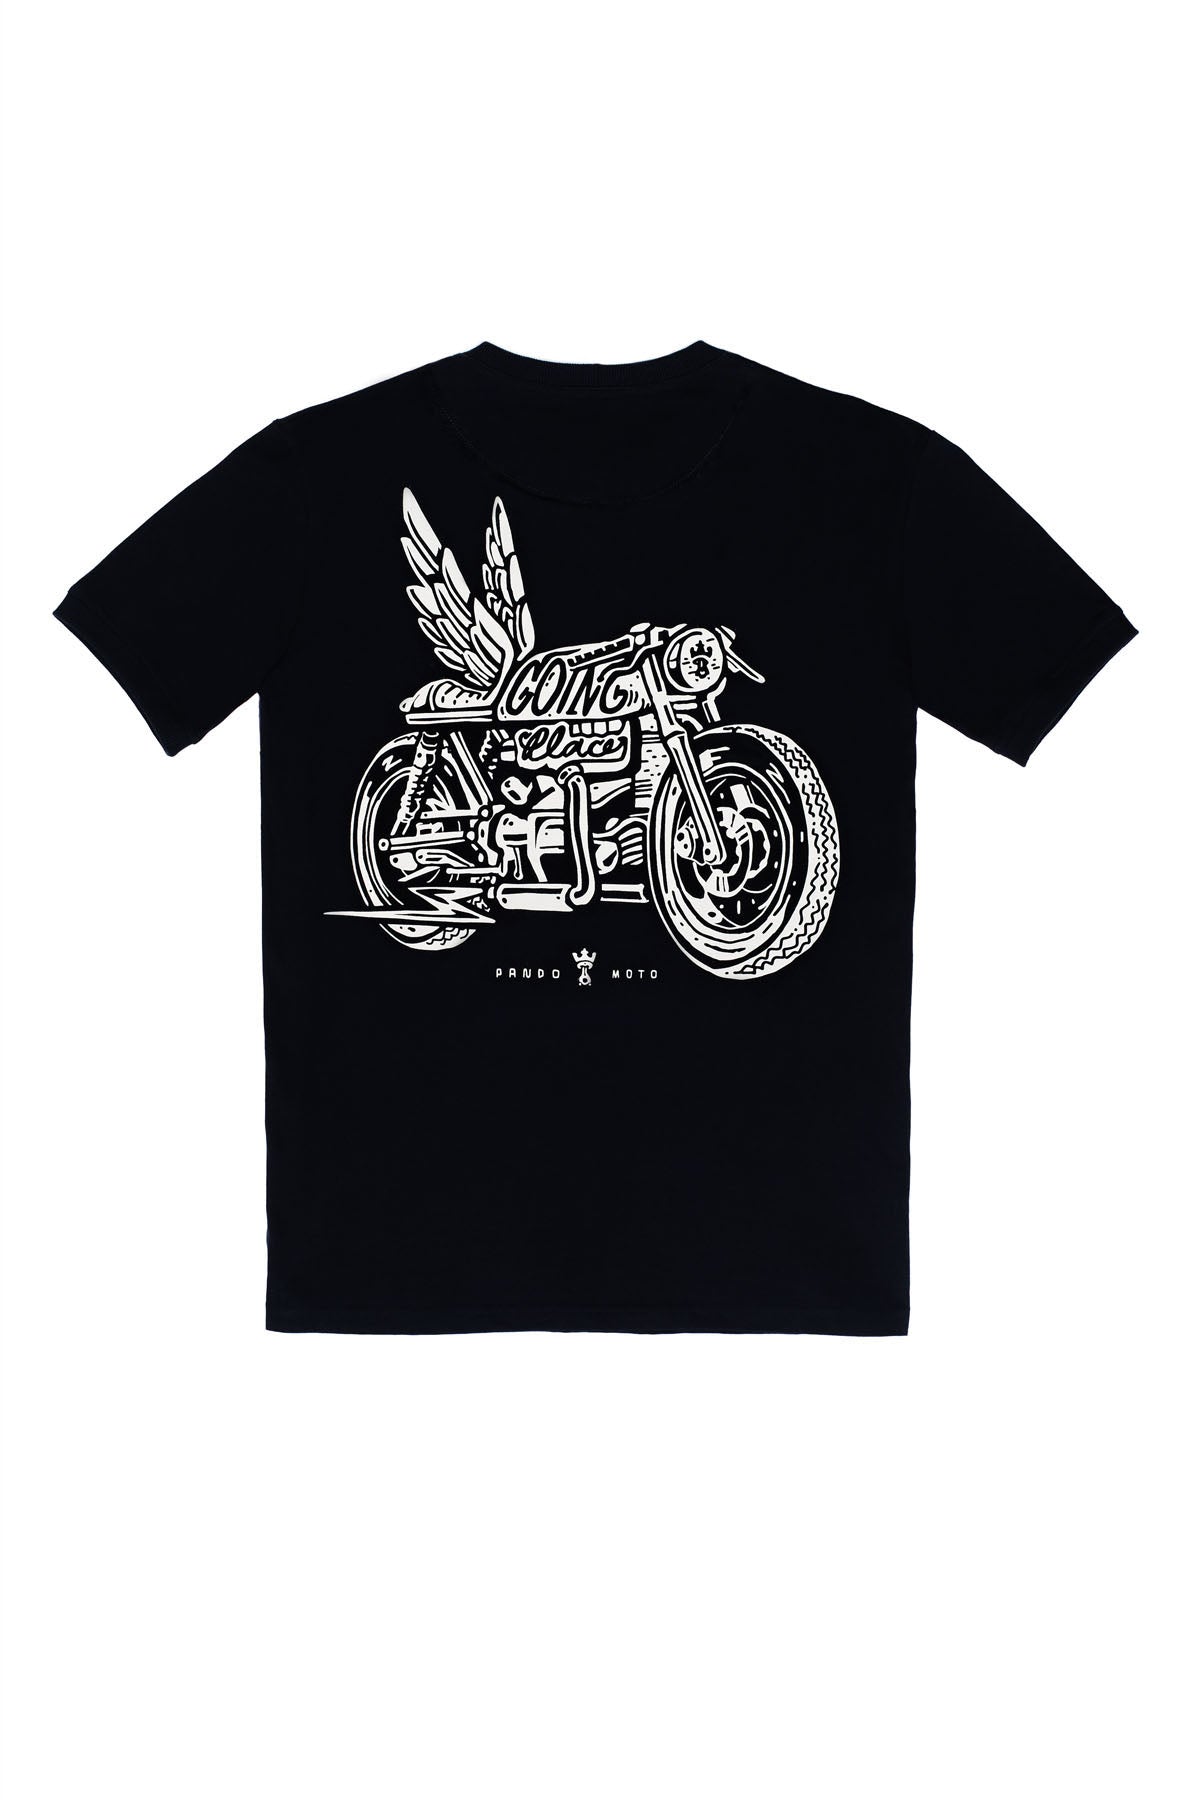 Pando Moto motorcycle t-shirt with the picture of a motorcycle with wings and title that says &quot;going places&quot;